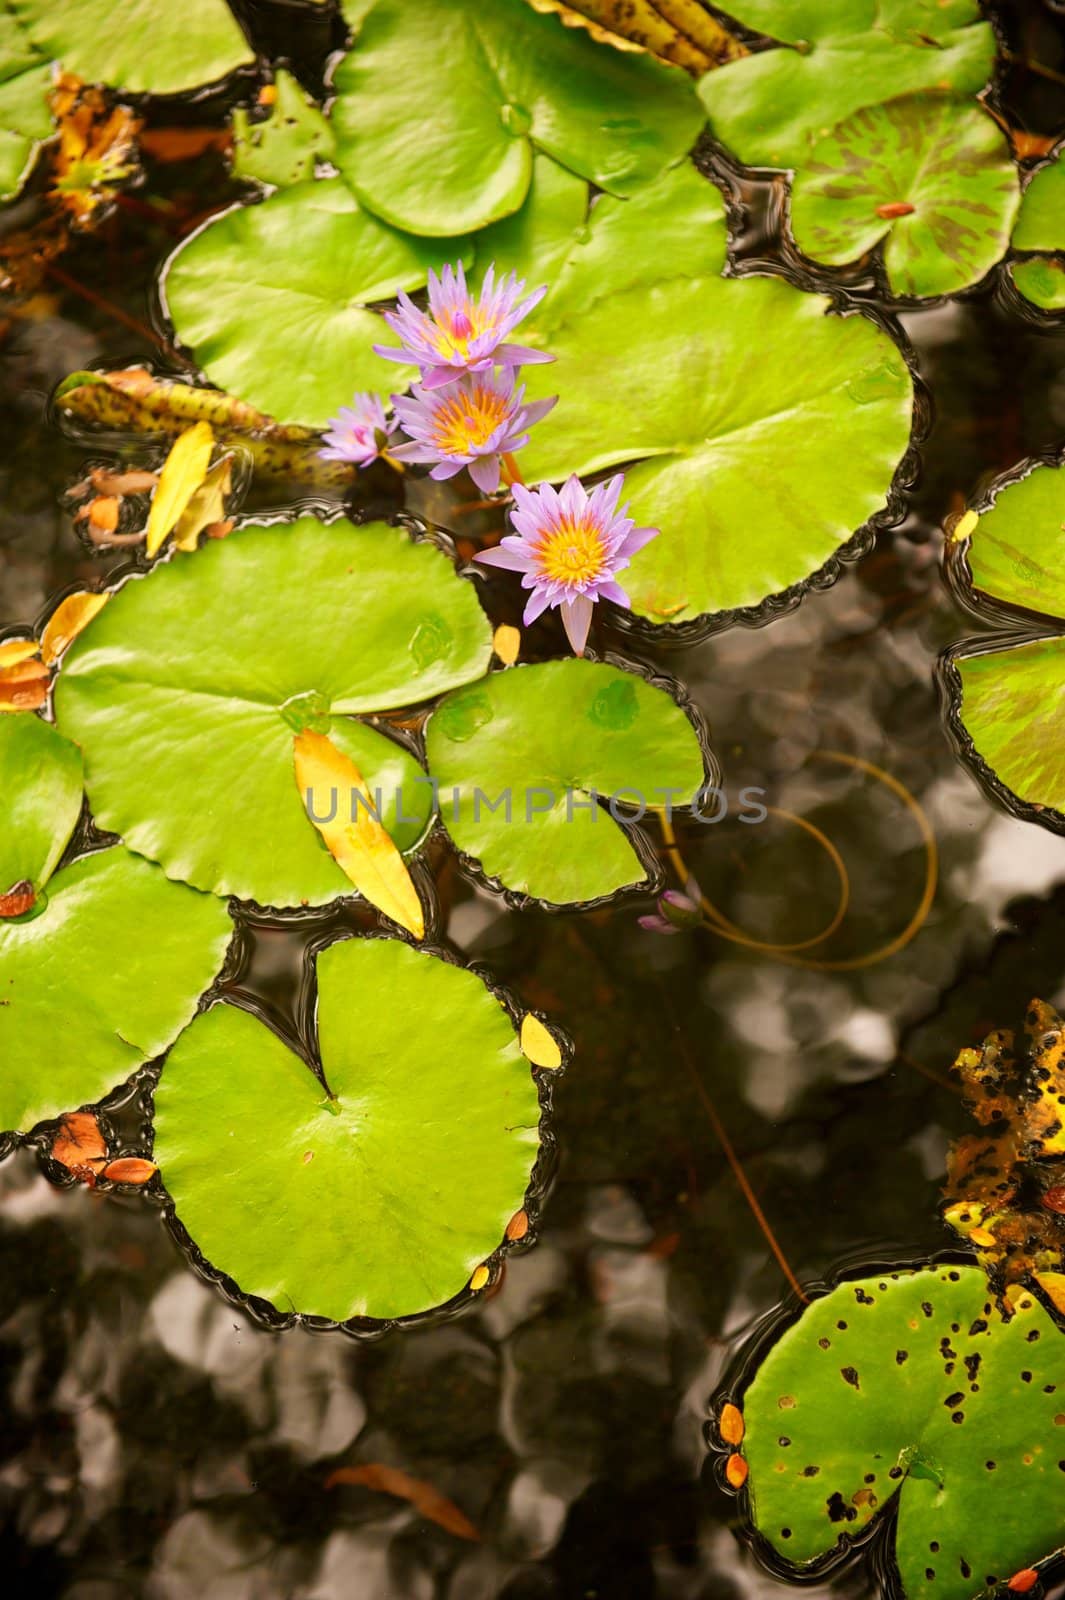 Lilly Pads and Flower in Pond by pixelsnap